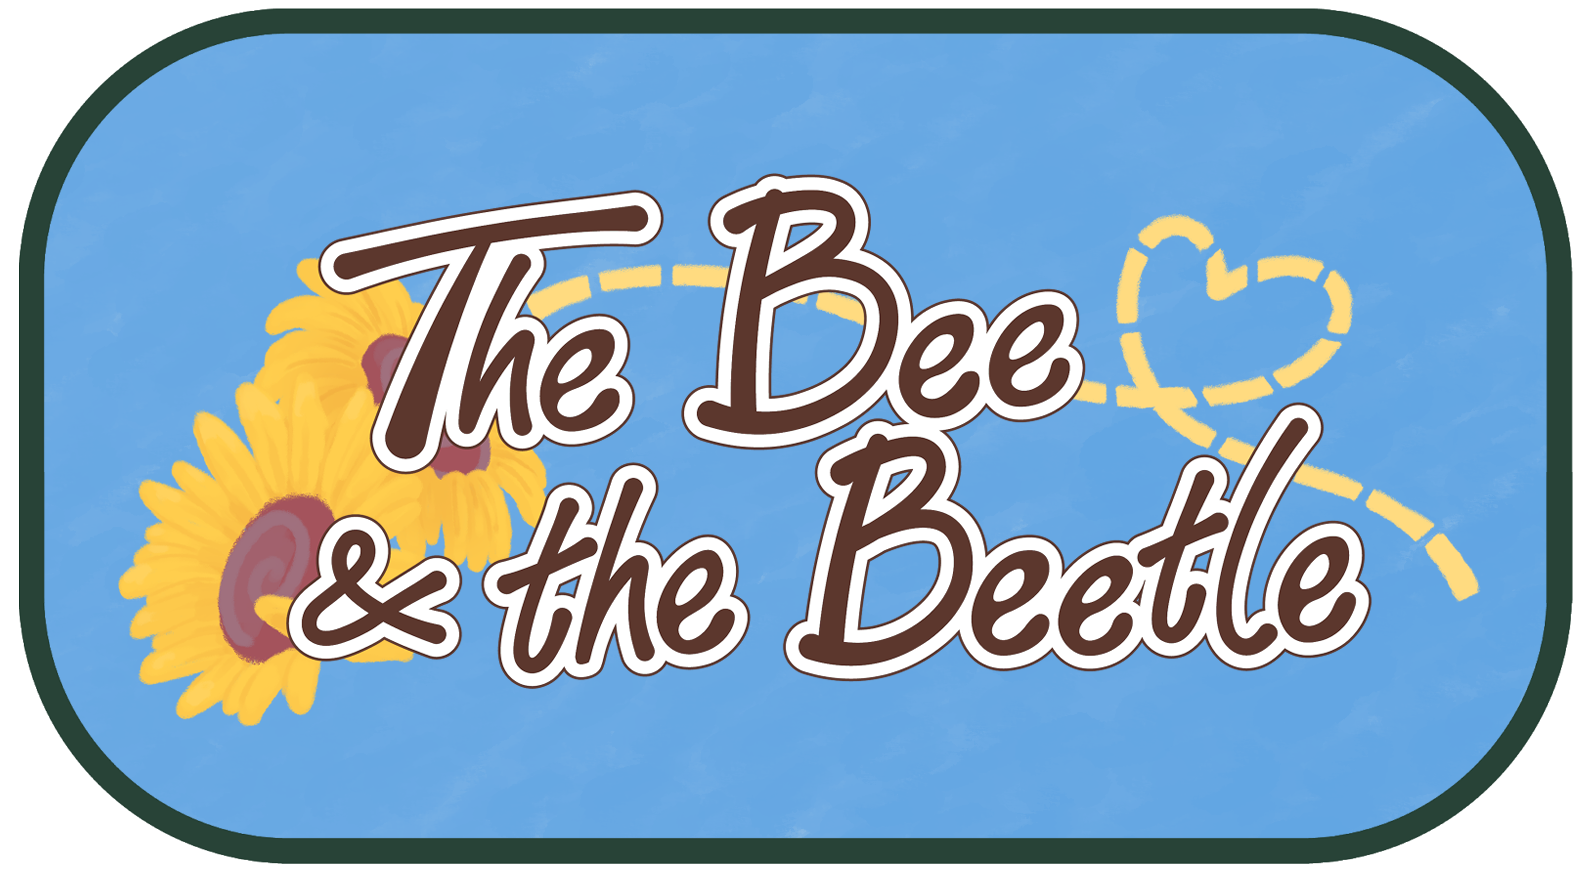 The Bee & the Beetle